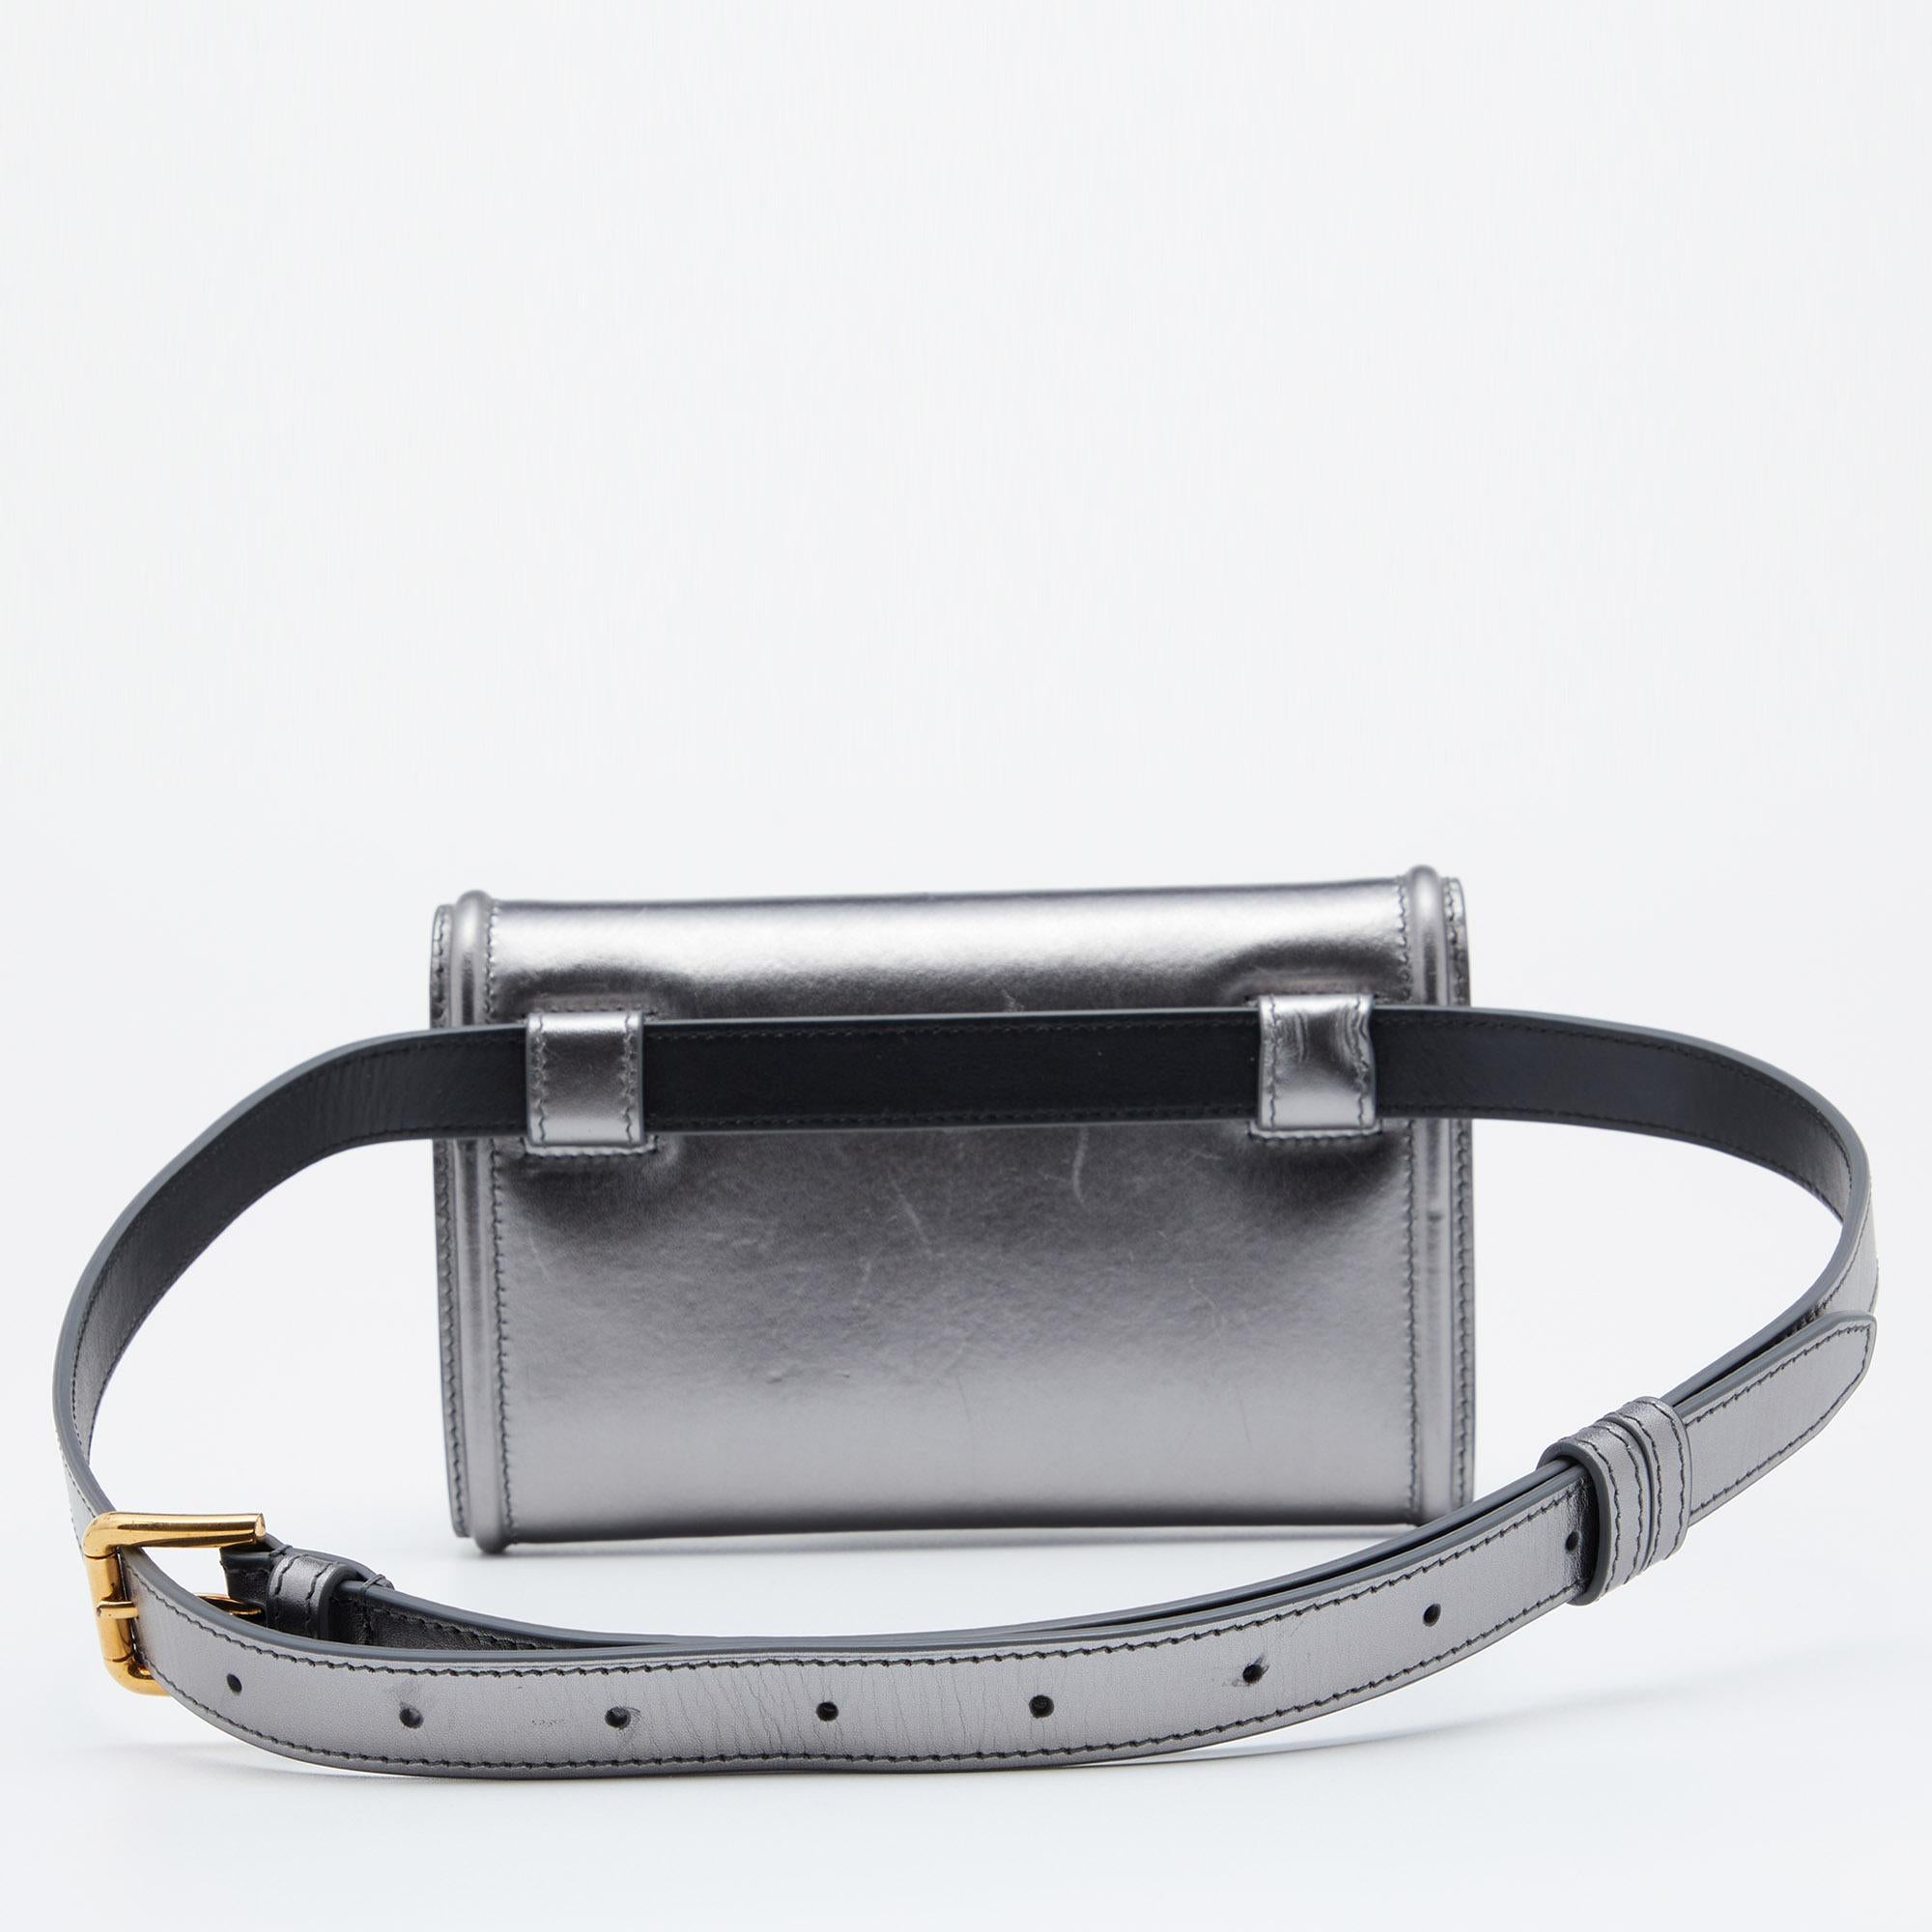 Be a part of the latest trends with this amazing belt bag from Dolce & Gabbana. Crafted with leather, the metallic grey bag comes with a front flap featuring the Devotion heart motif. Equipped with a leather-lined interior and an adjustable belt,